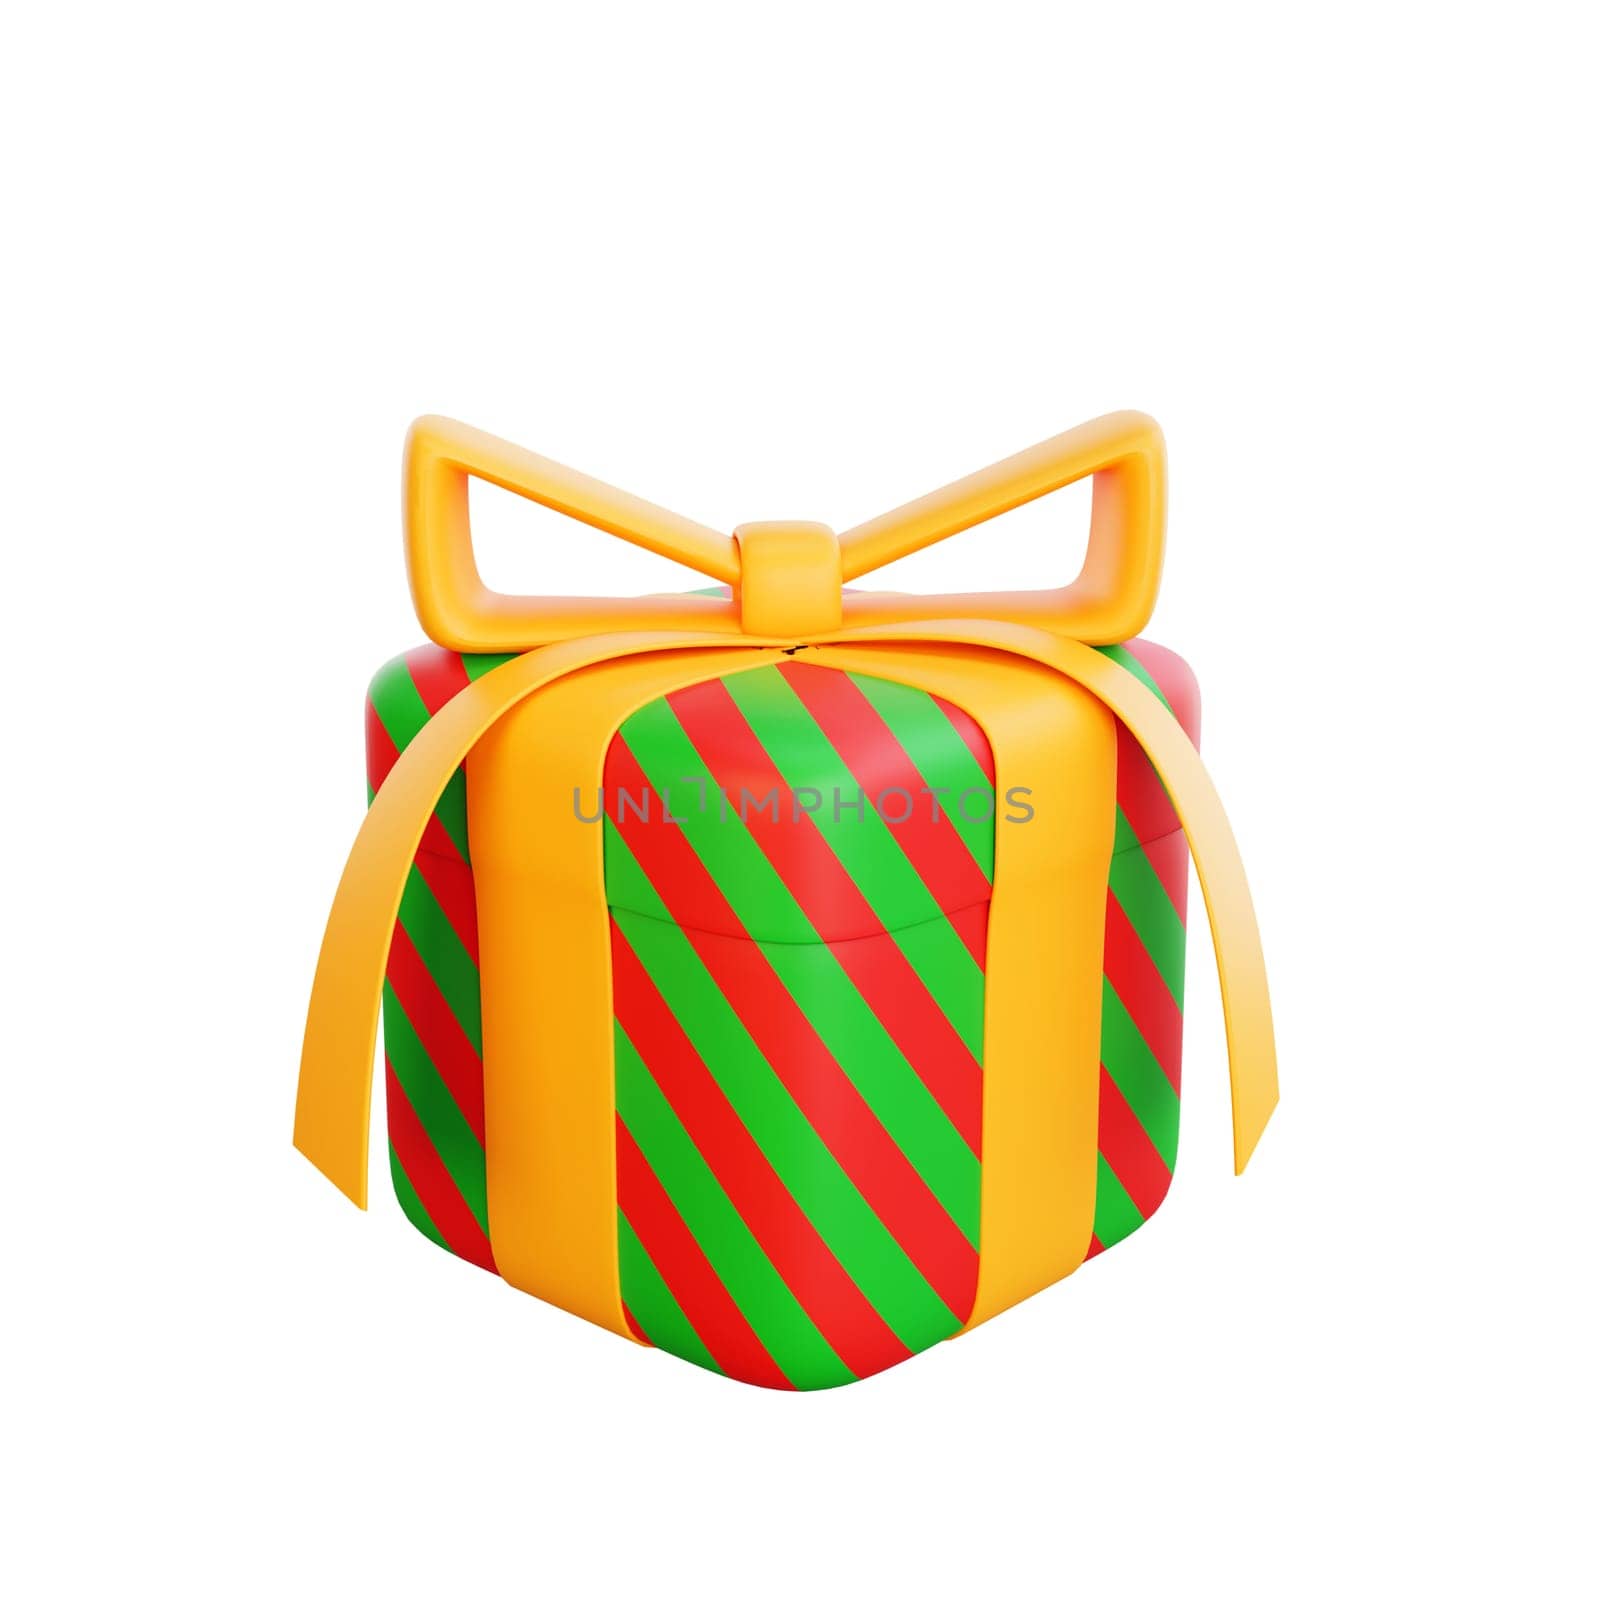 3D illustration of a Christmas gift icon. Perfect for Christmas and happy new year celebrations